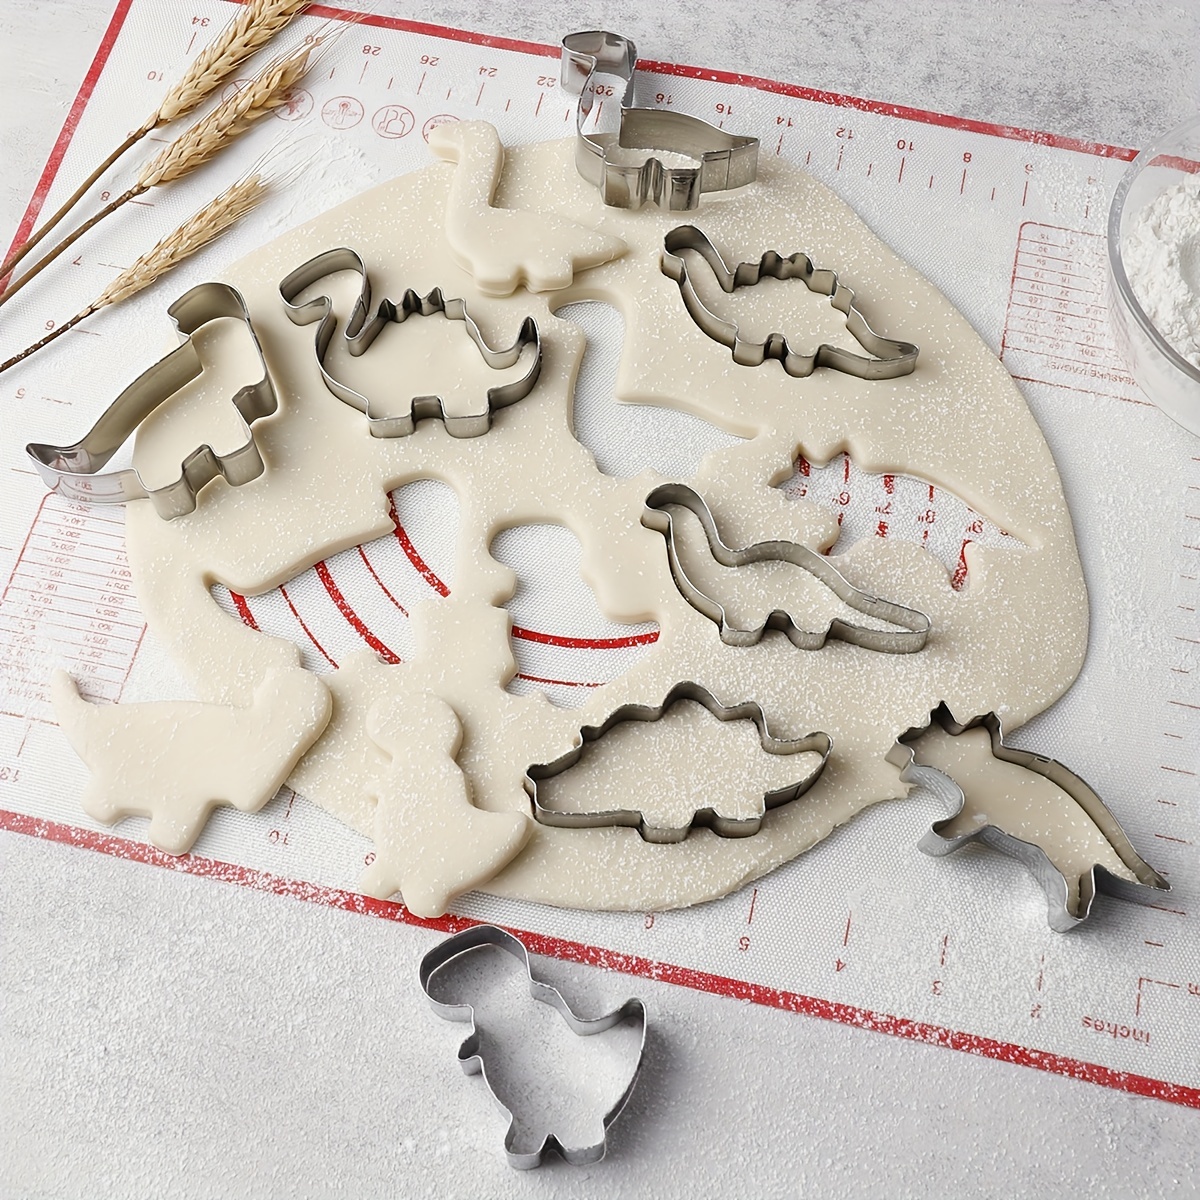 

8pcs, Dinosaur Cookie Cutters, Stainless Steel Pastry Cutters, Cartoon Dinosaurs Biscuit Molds Set, Baking Tools, Kitchen Accessories